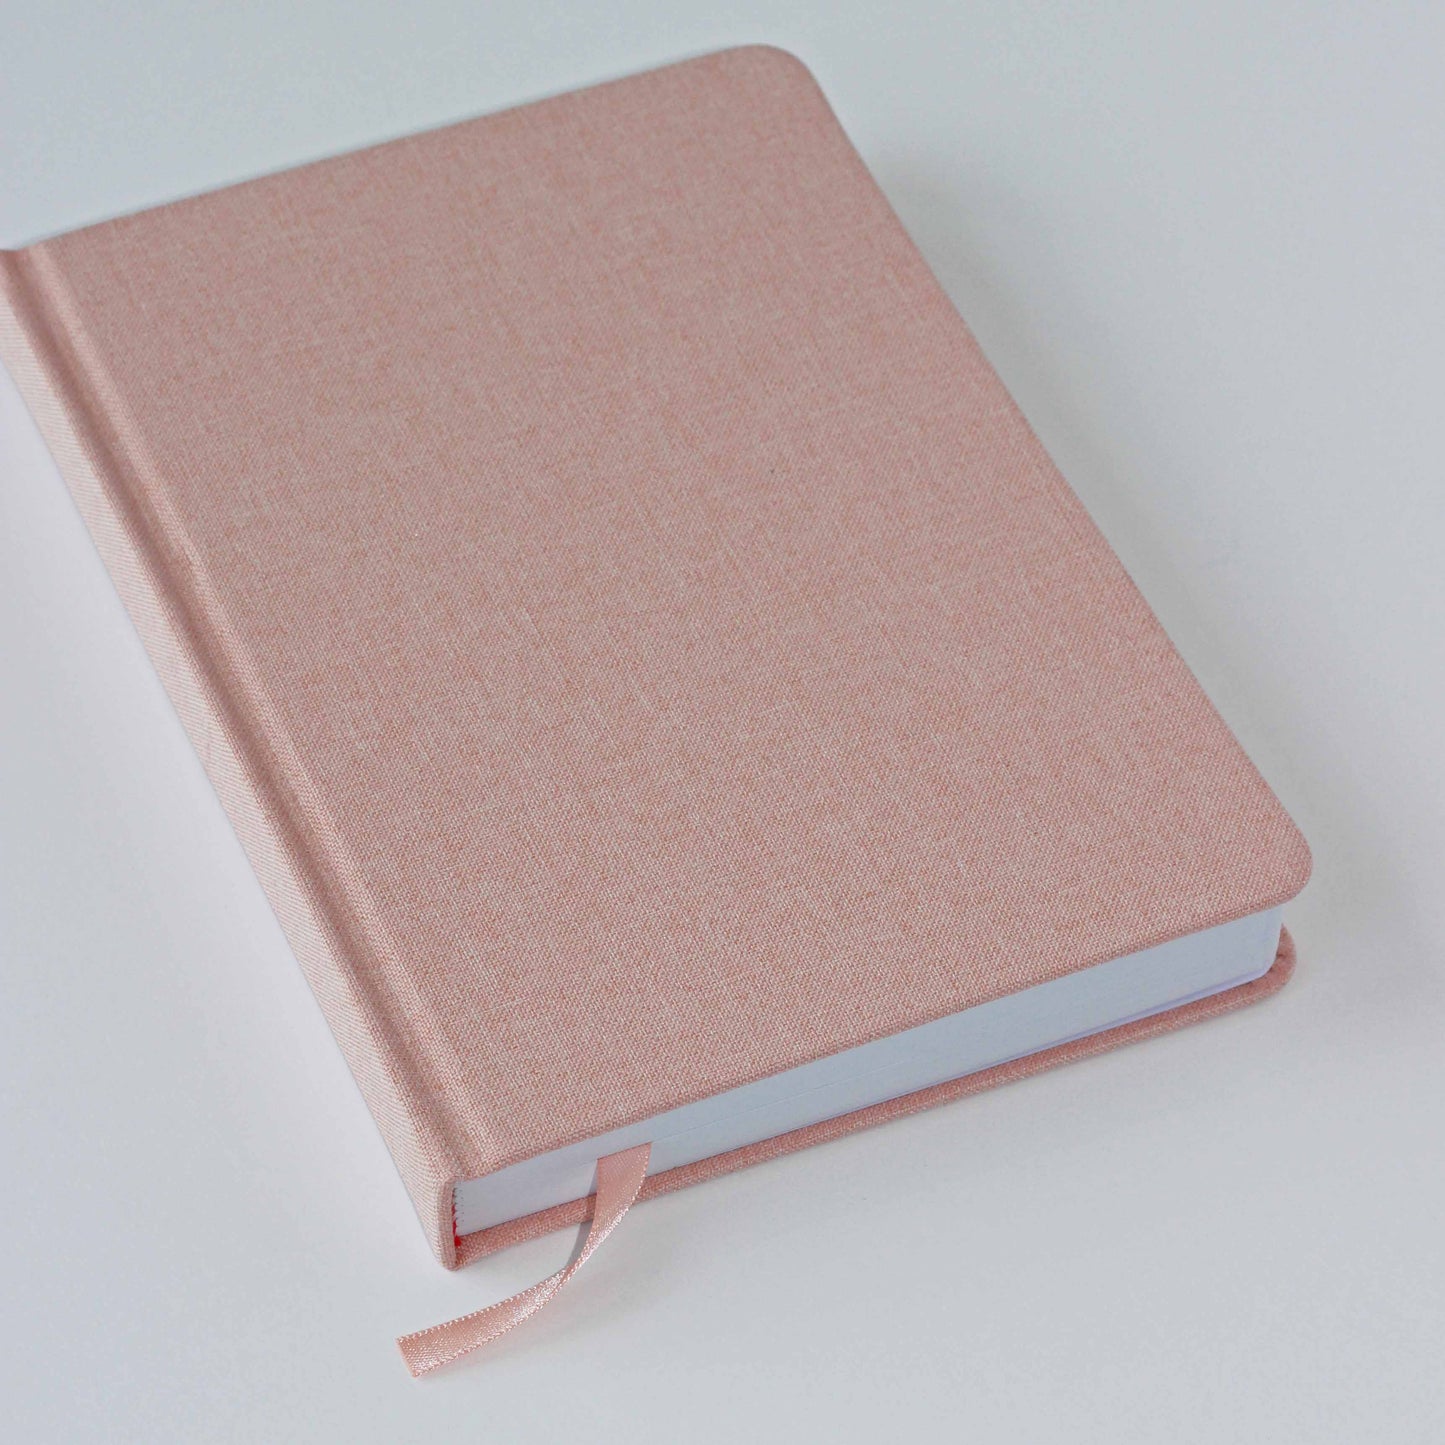 Linen Diary - Pink